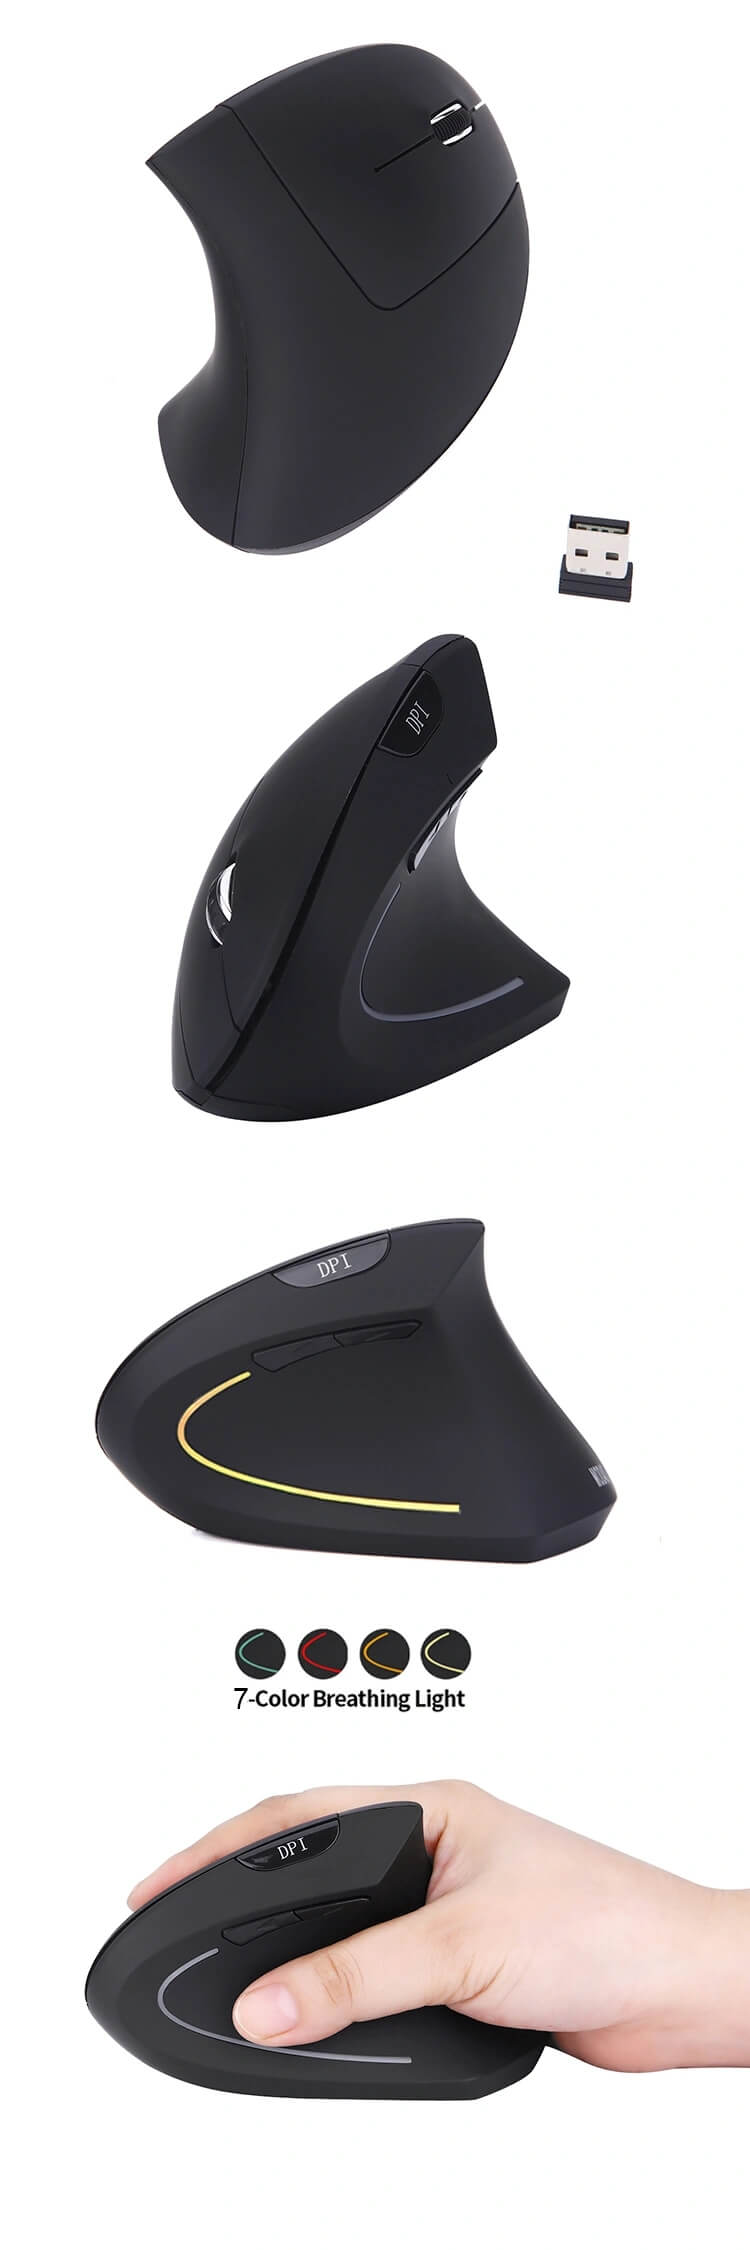 New-Human-Ergonomic-Wireless-Mouse-2-4GHz-Optical-Vertical-Mice-Right-Hand-Mouse.webp.jpg